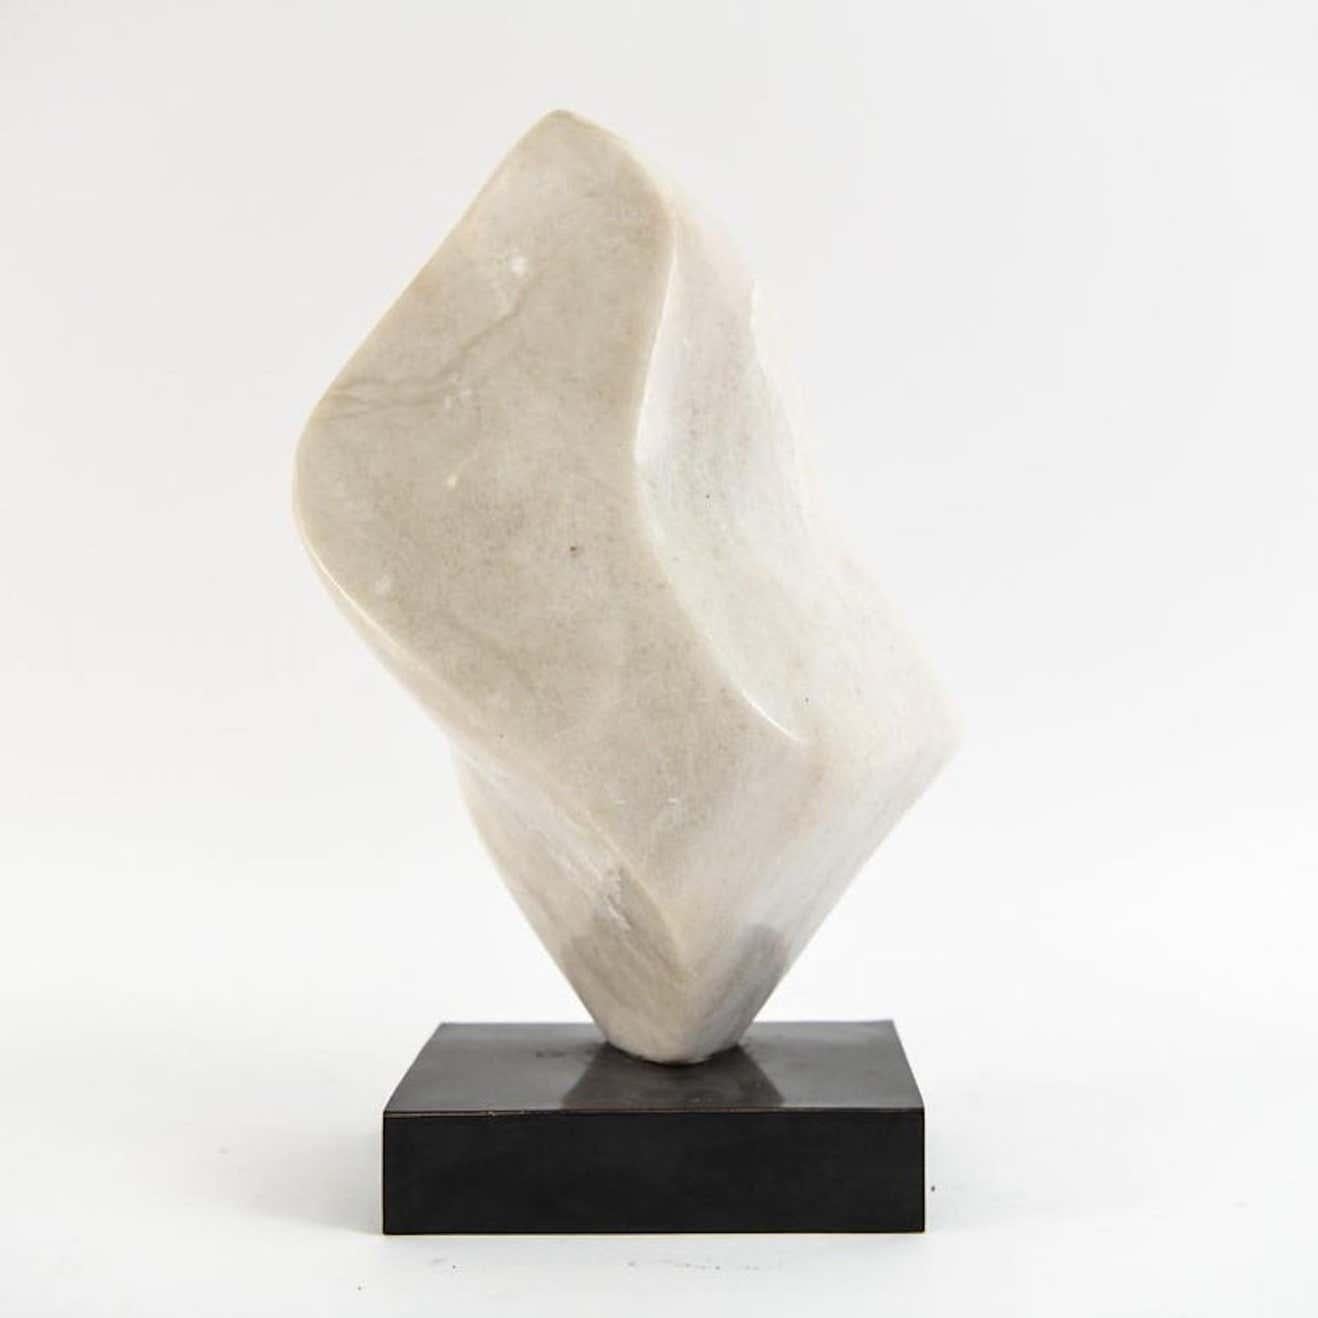 Organic contemporary abstract alabaster sculpture by Ross de Matteo (1914 - 2004) Upright wave shape with dramatic flow. It is perfect for a bookcase or on display on a pedestal.